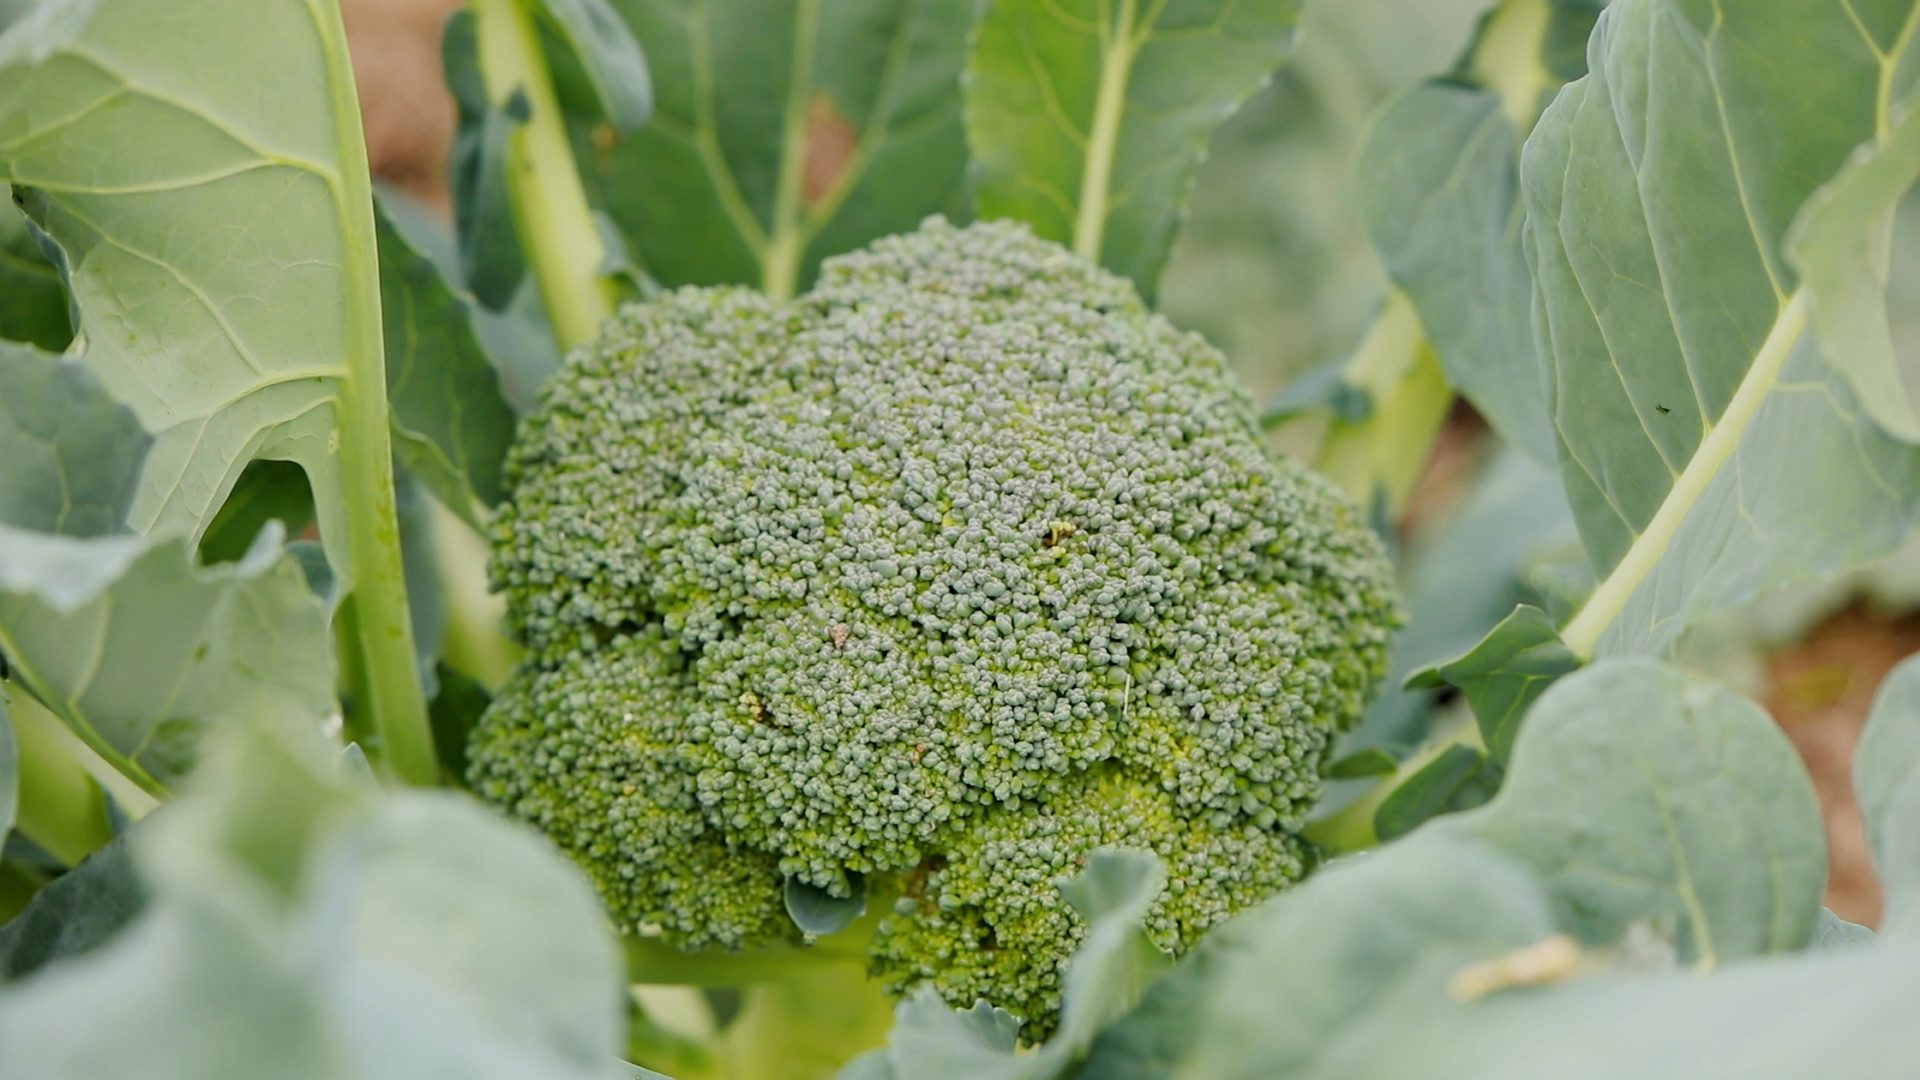 Broccoli is a common crop planted in fall gardens.